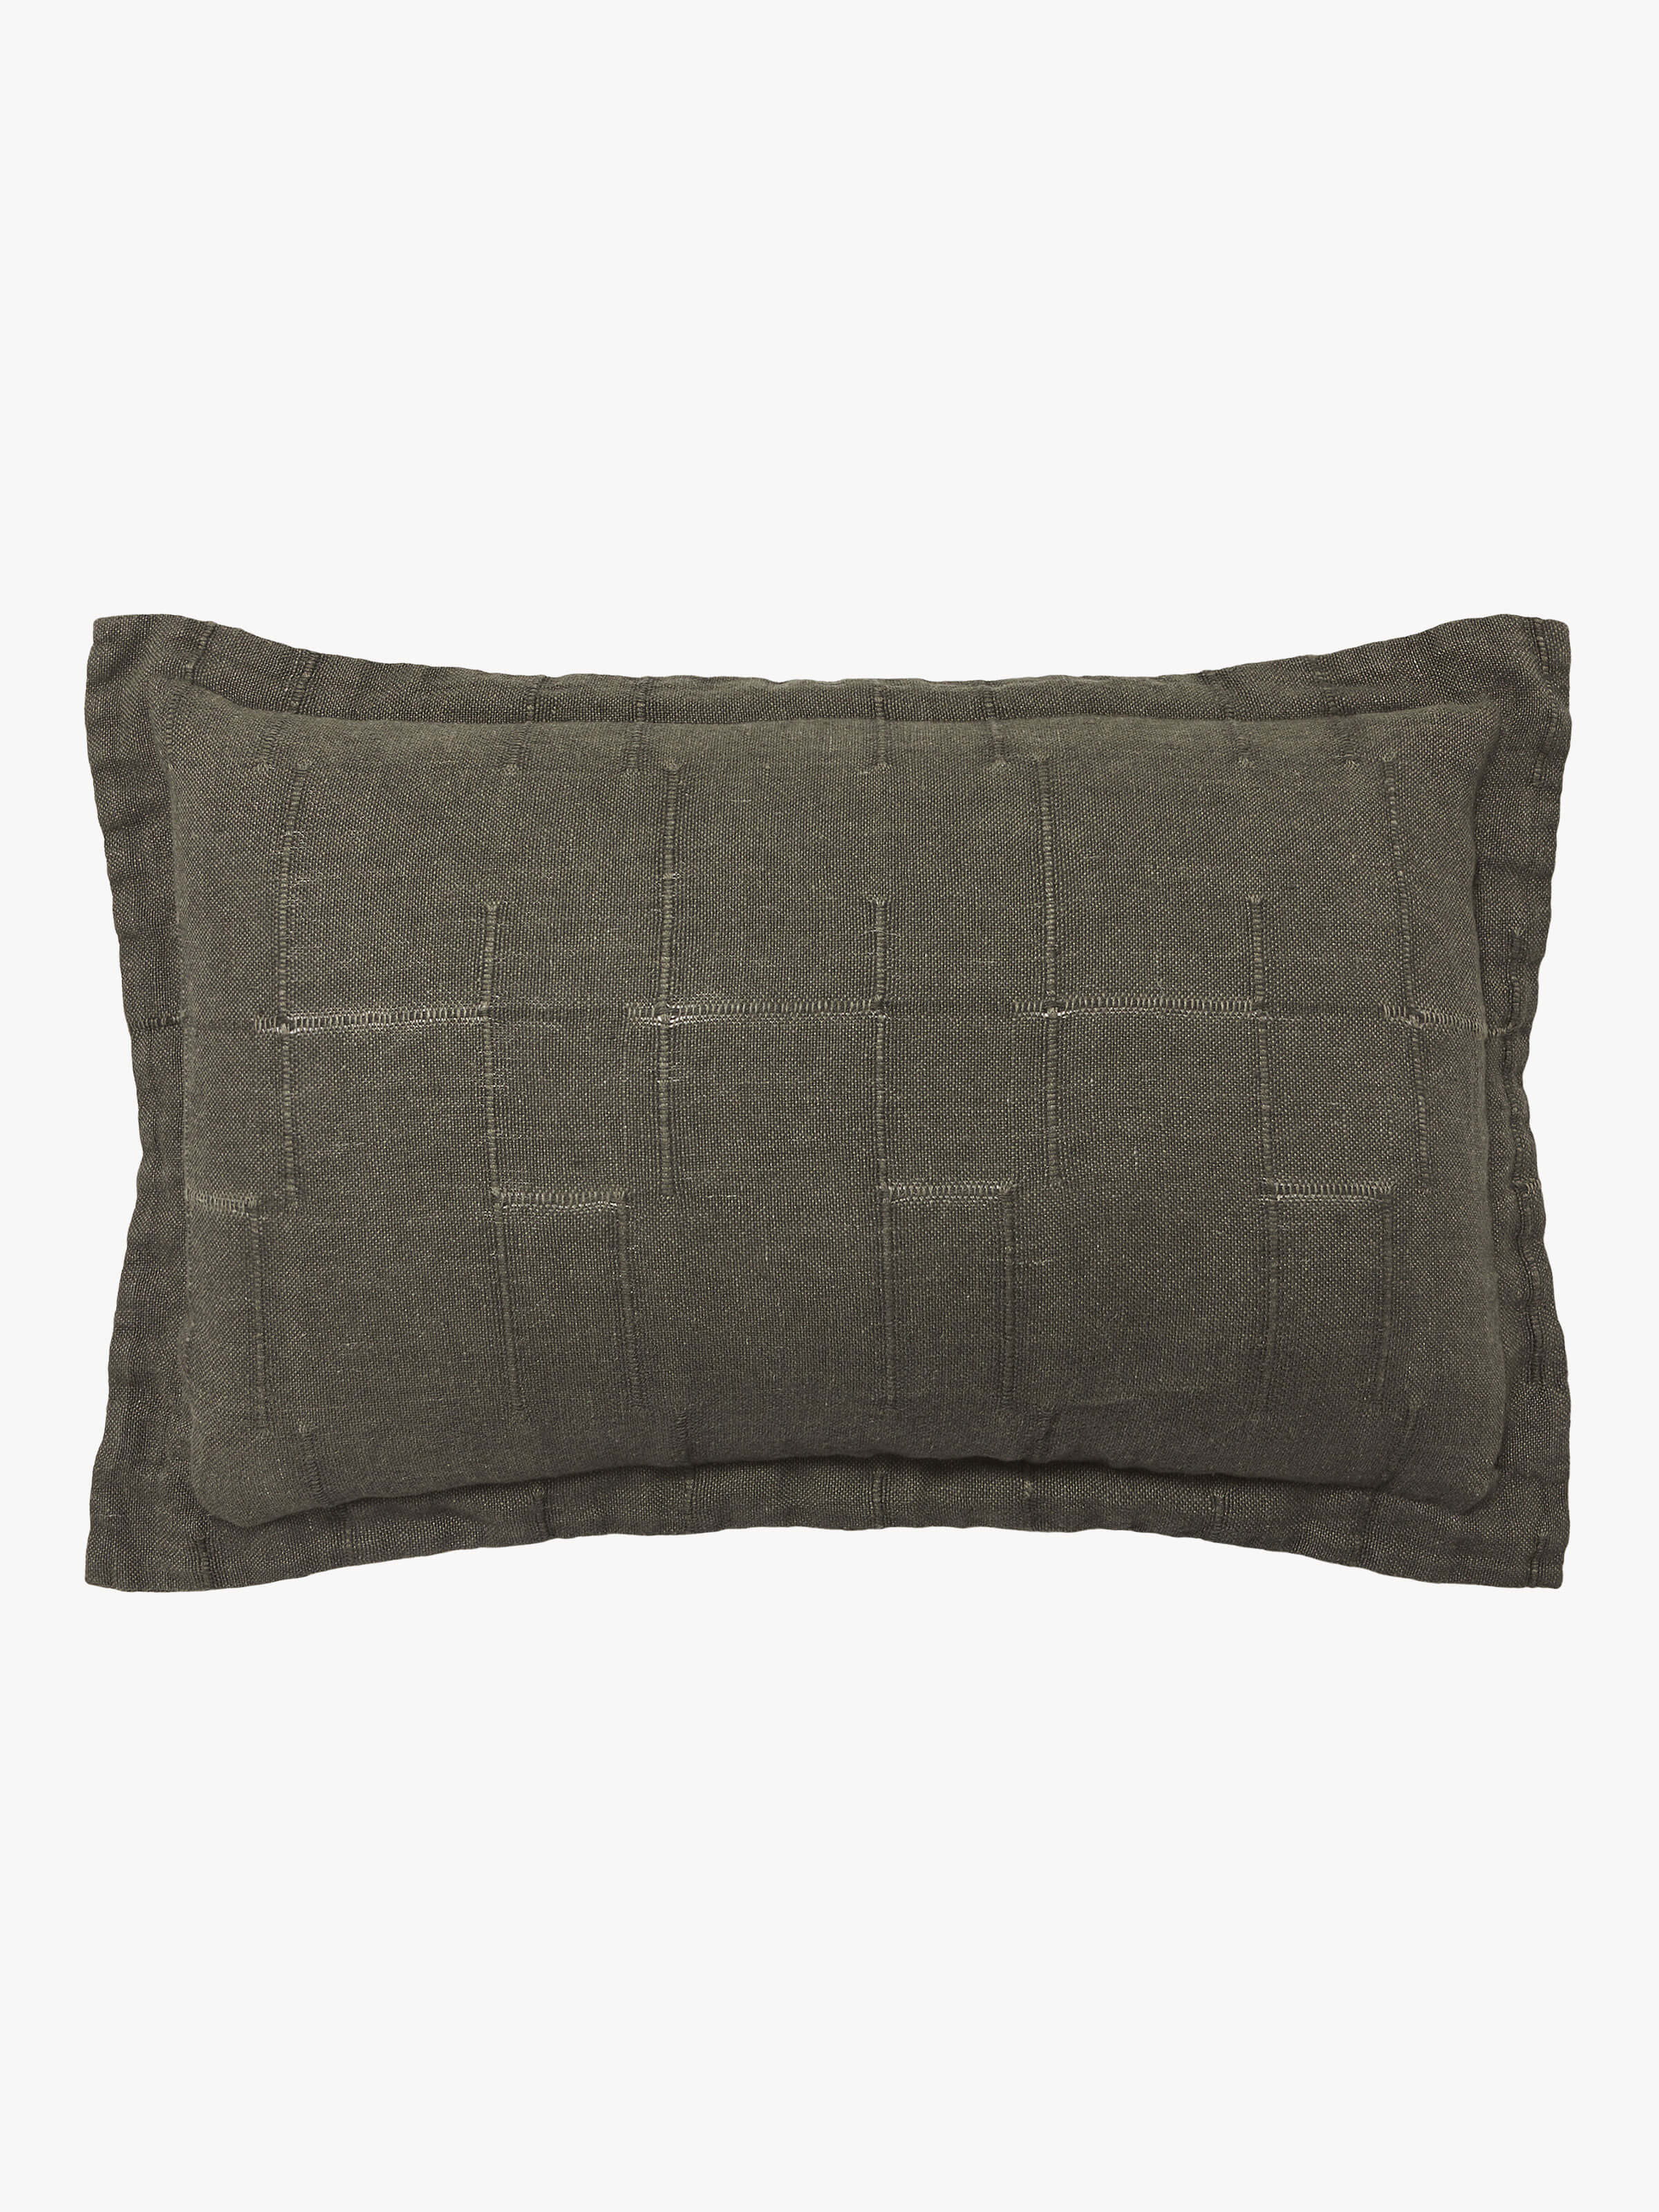 Palermo Olive French Linen Rectangle Cushion